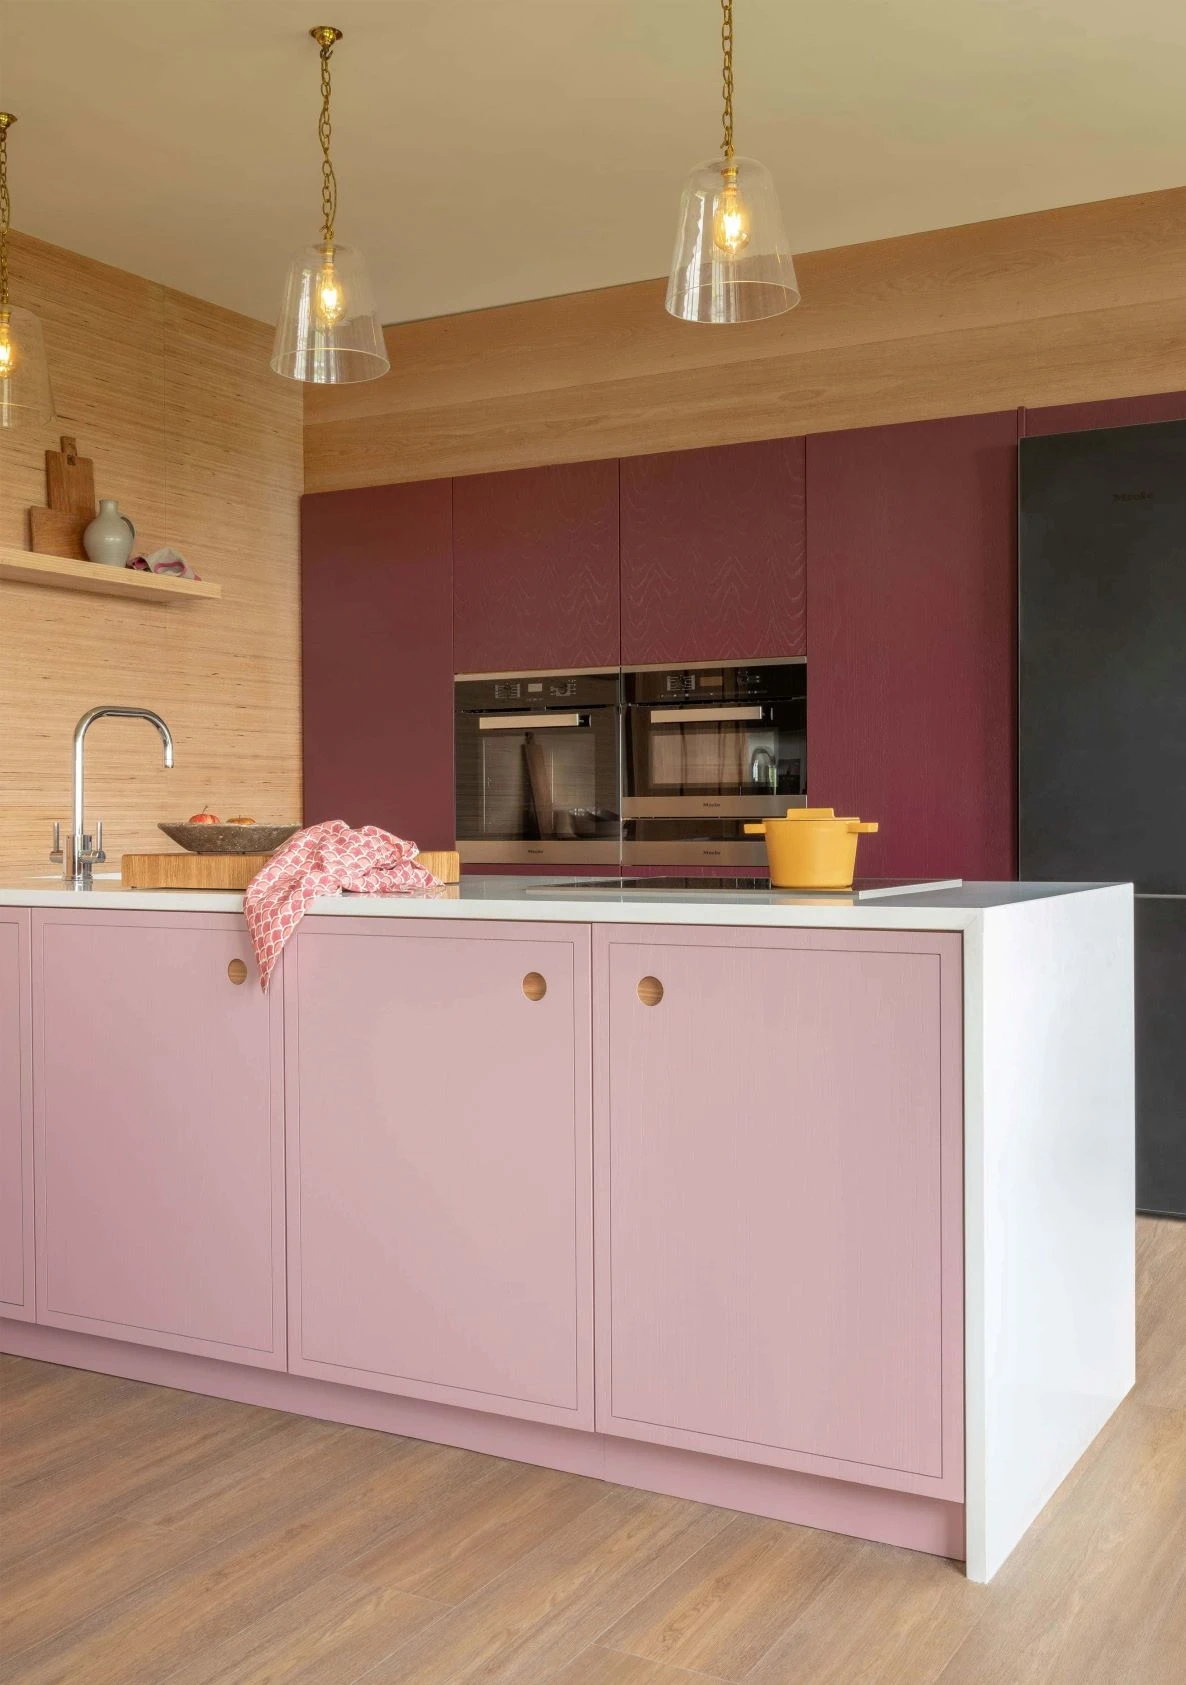 Natural bramble & pink tones blend seamlessly throughout the kitchen, infusing the space with energy & character.